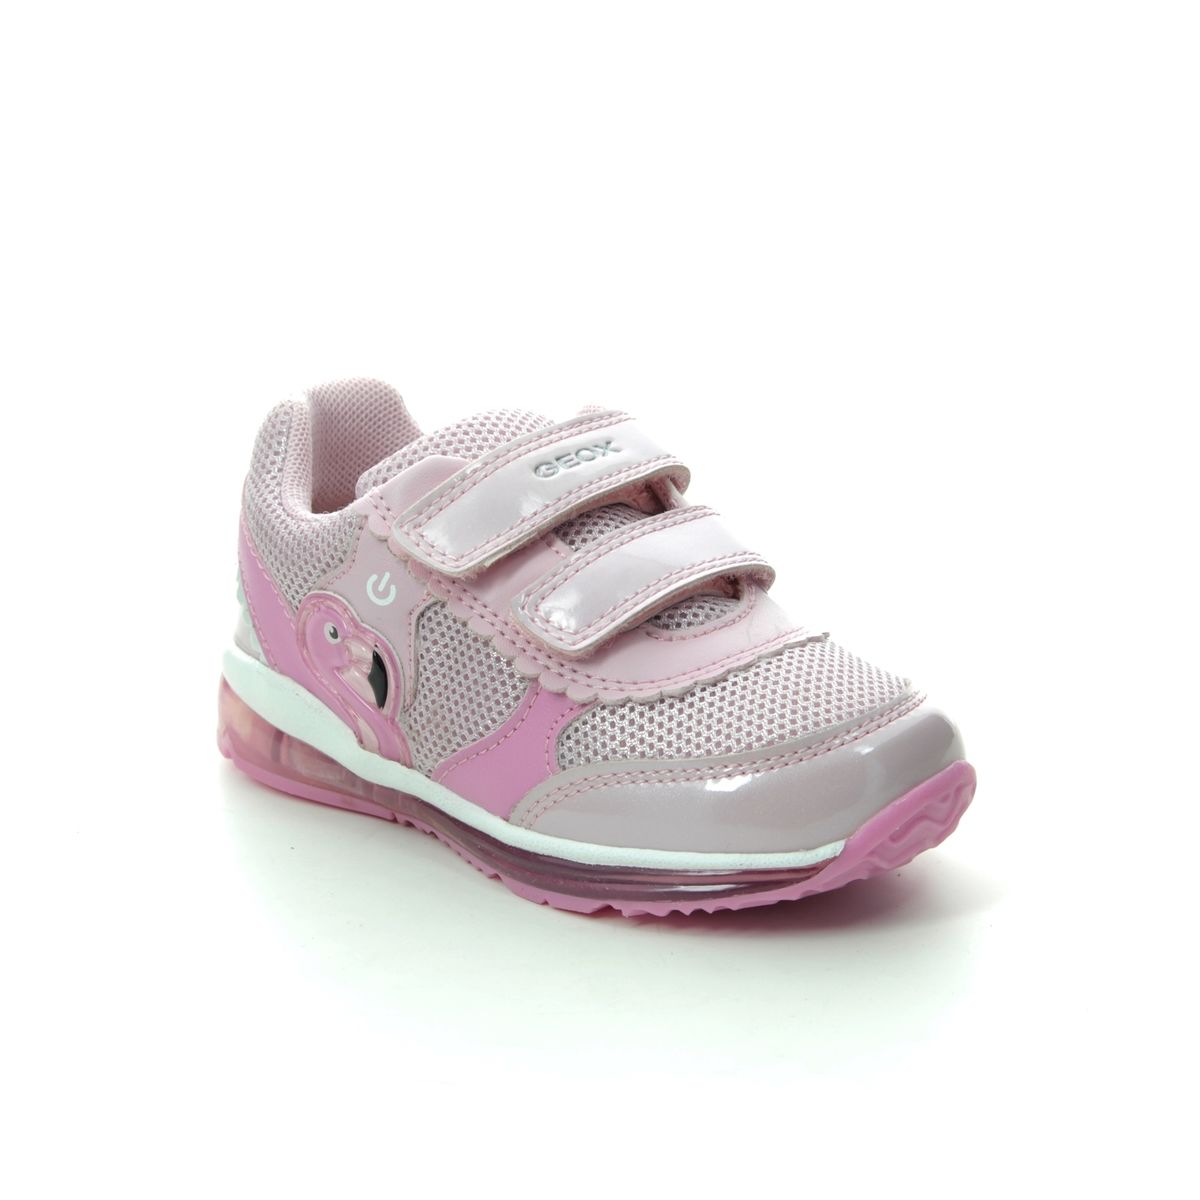 Geox Baby Girl toddler girls trainers